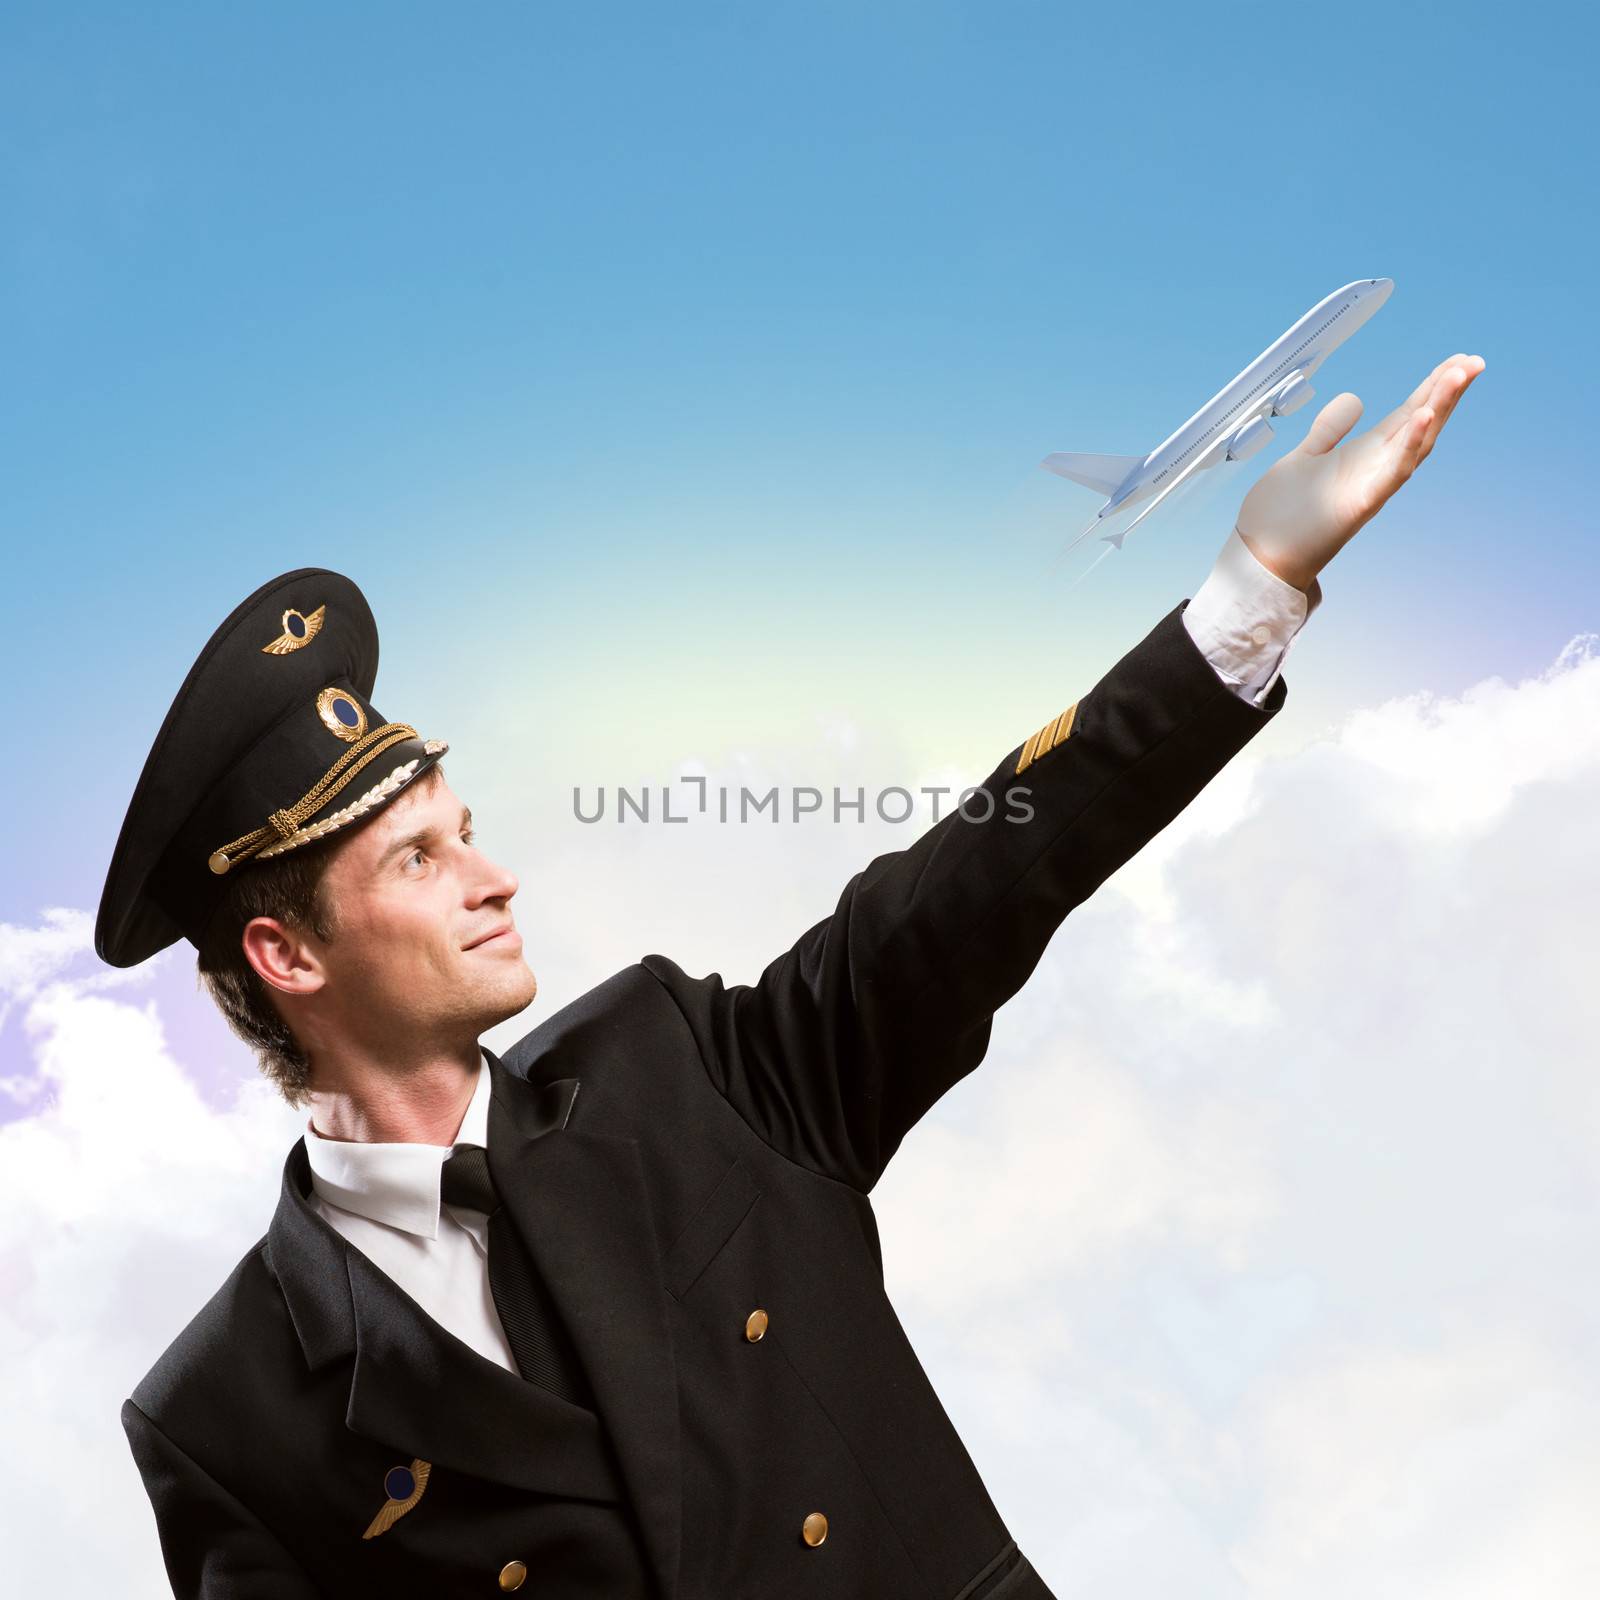 pilot in the form of extending a hand to a flying airplane on the background of sky with clouds